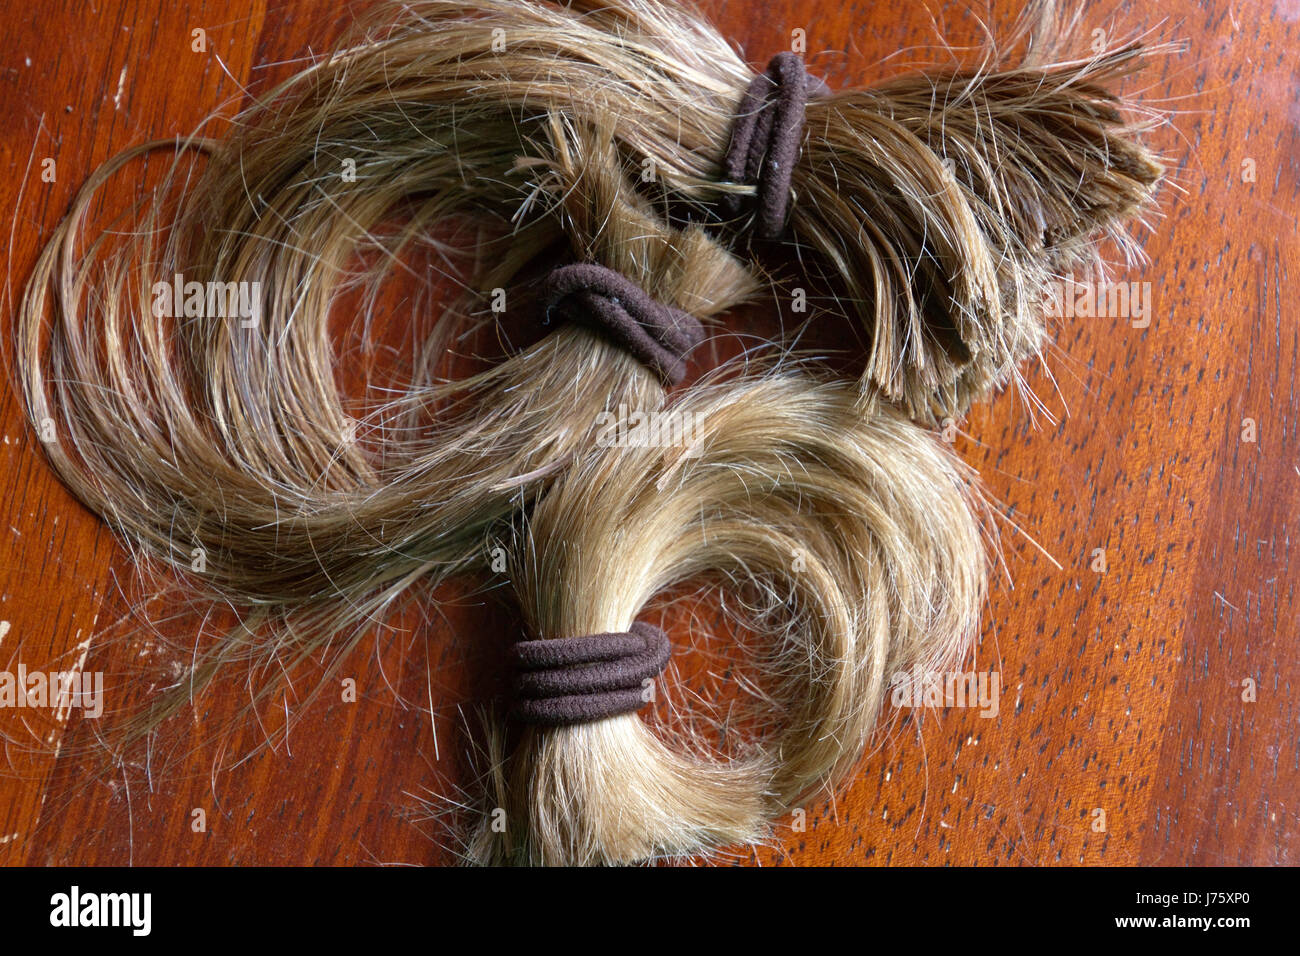 Close up of a thick, cut-off ponytail of long blond hair held together with brown hair ties Stock Photo